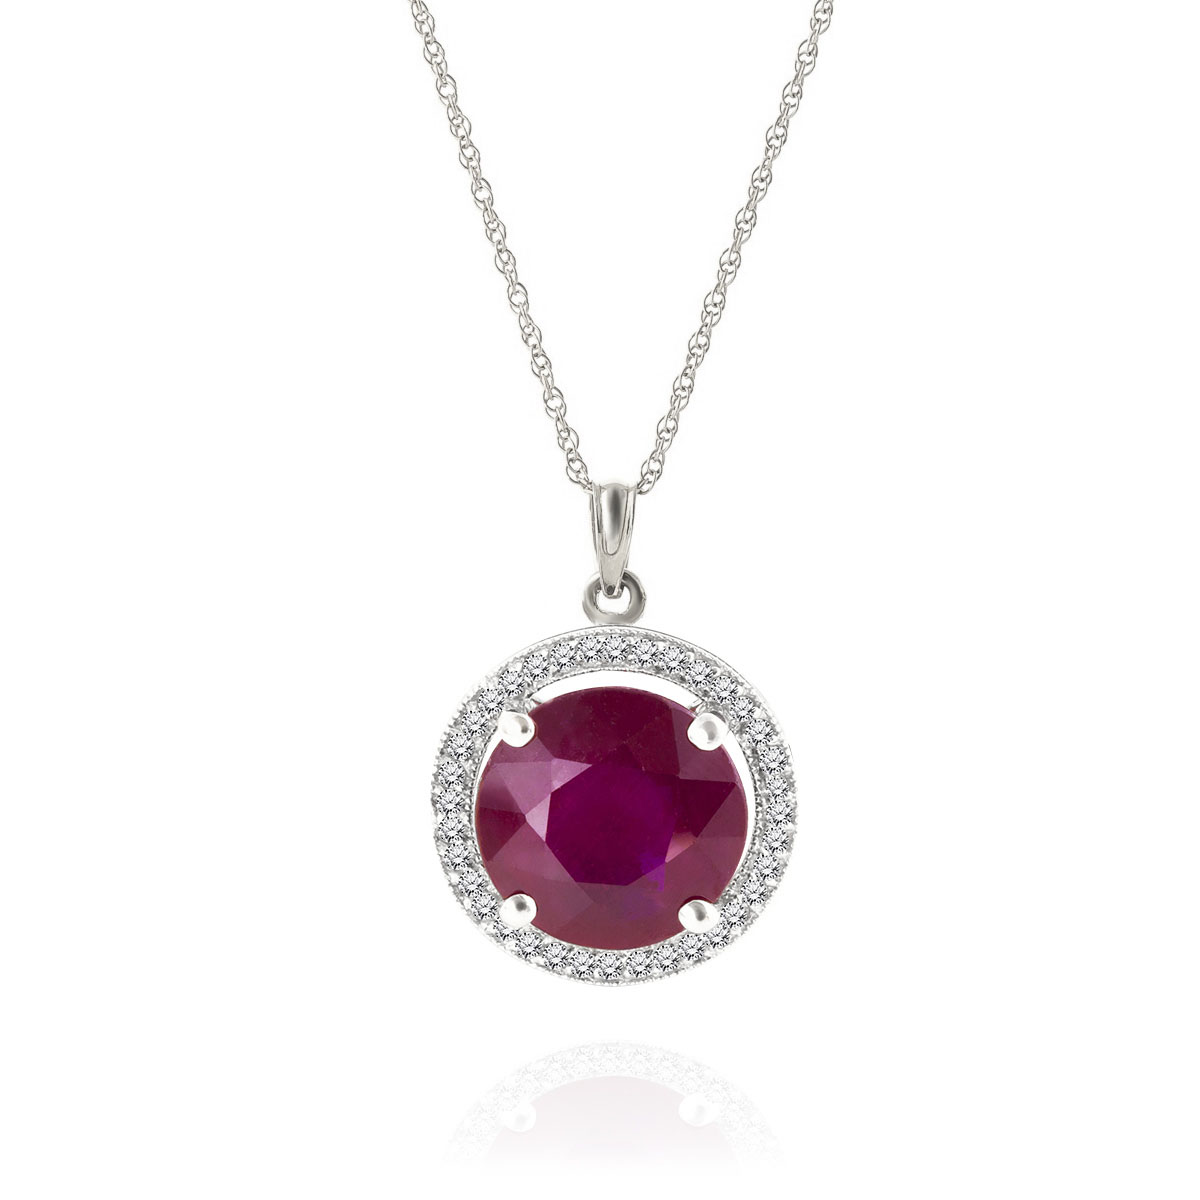 Ruby & Diamond Halo Pendant Necklace in 9ct White Gold